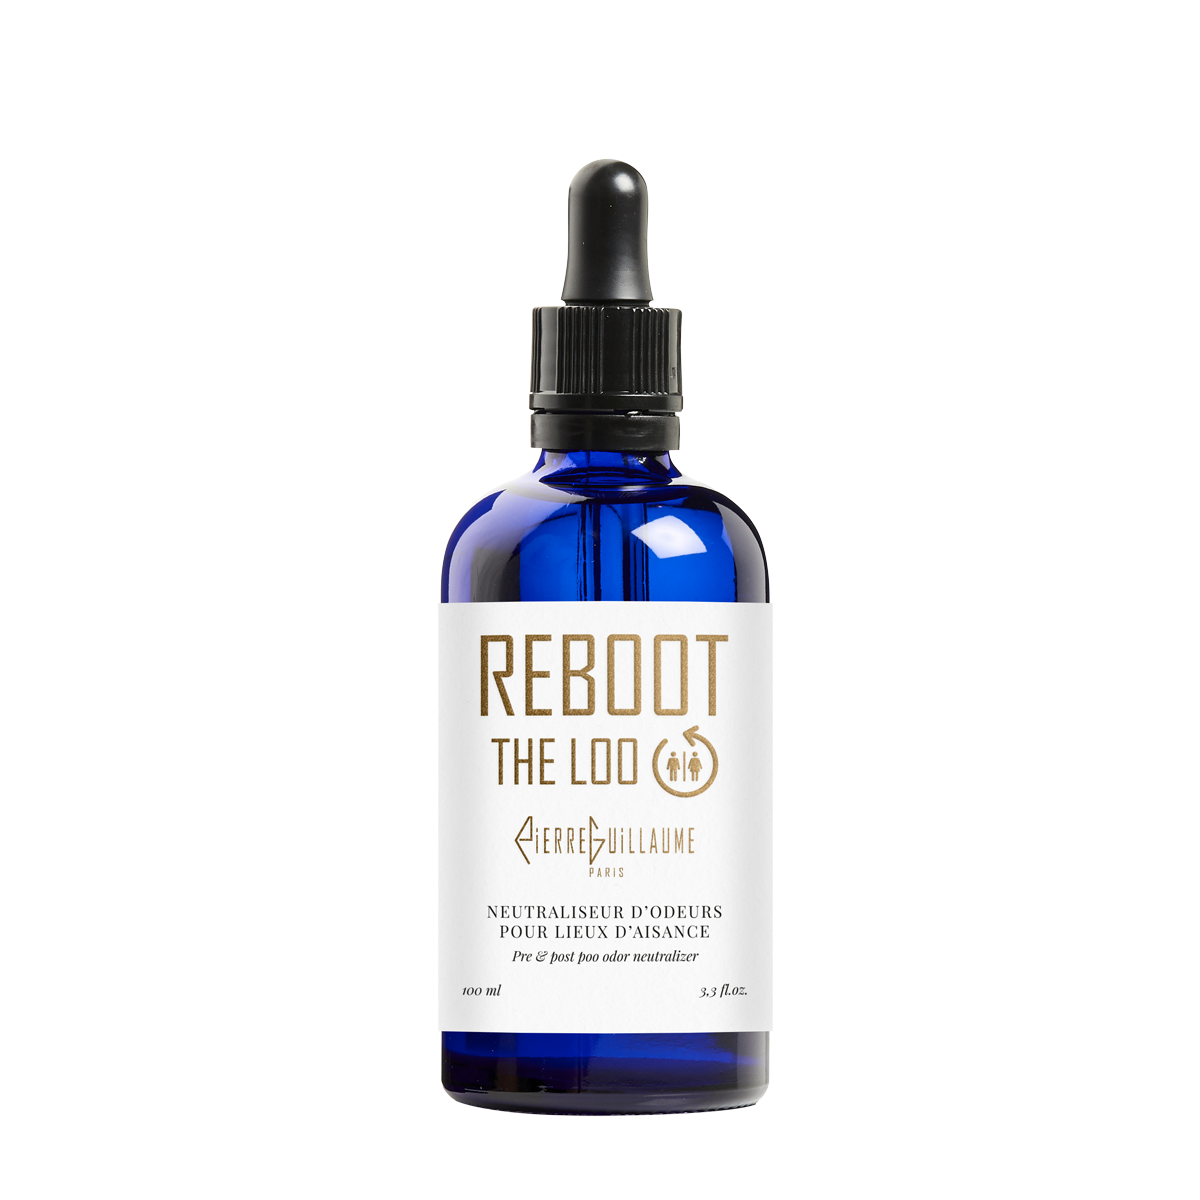 Reboot the loo - Odor neutralizer for washrooms, scents of Verbena Leaf, Licorice, Mint